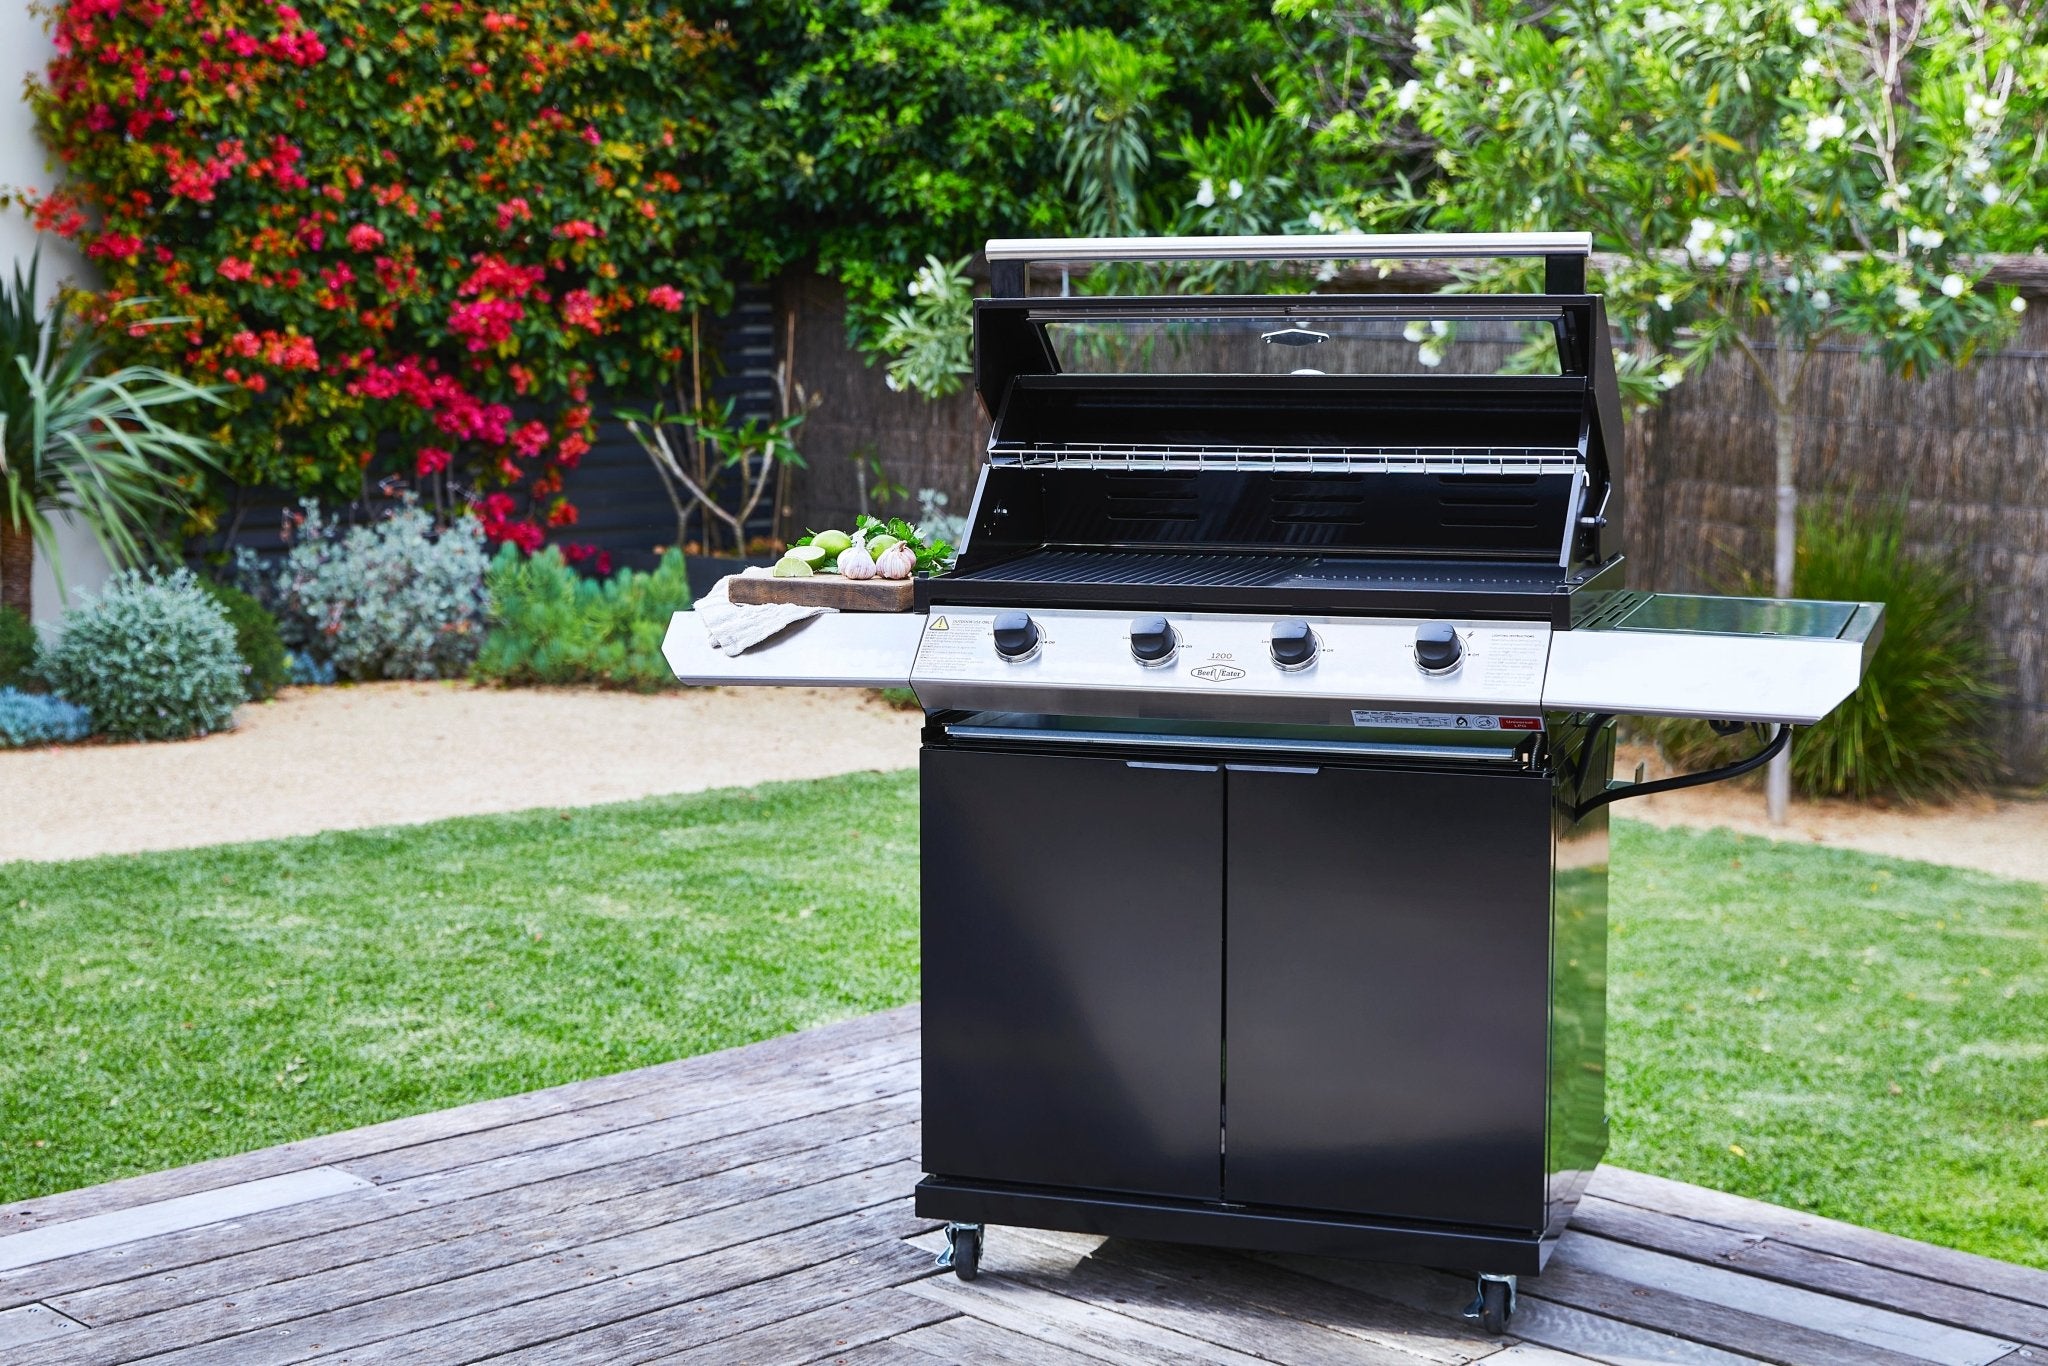 Beefeater 1200S Series - 3 Burner BBQ & Side Burner Trolley - The Outdoor Kitchen Company Ltd